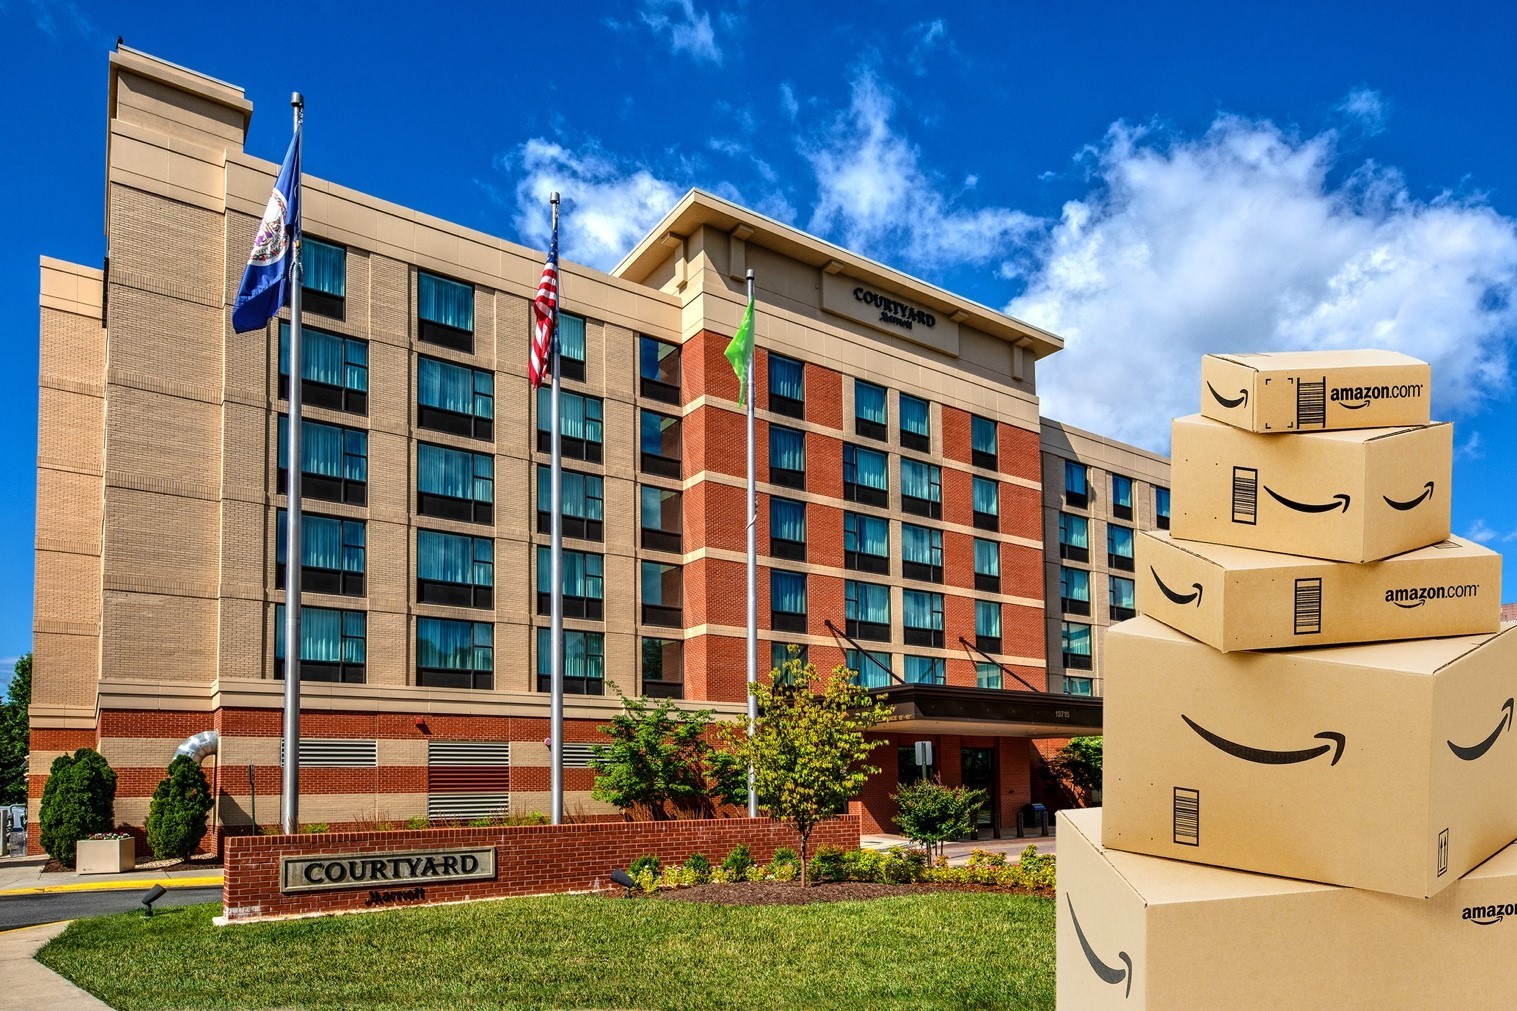 Sunny Days Are Here! MCR Acquires the Residence Inn by Marriott near Sesame Place  Copy